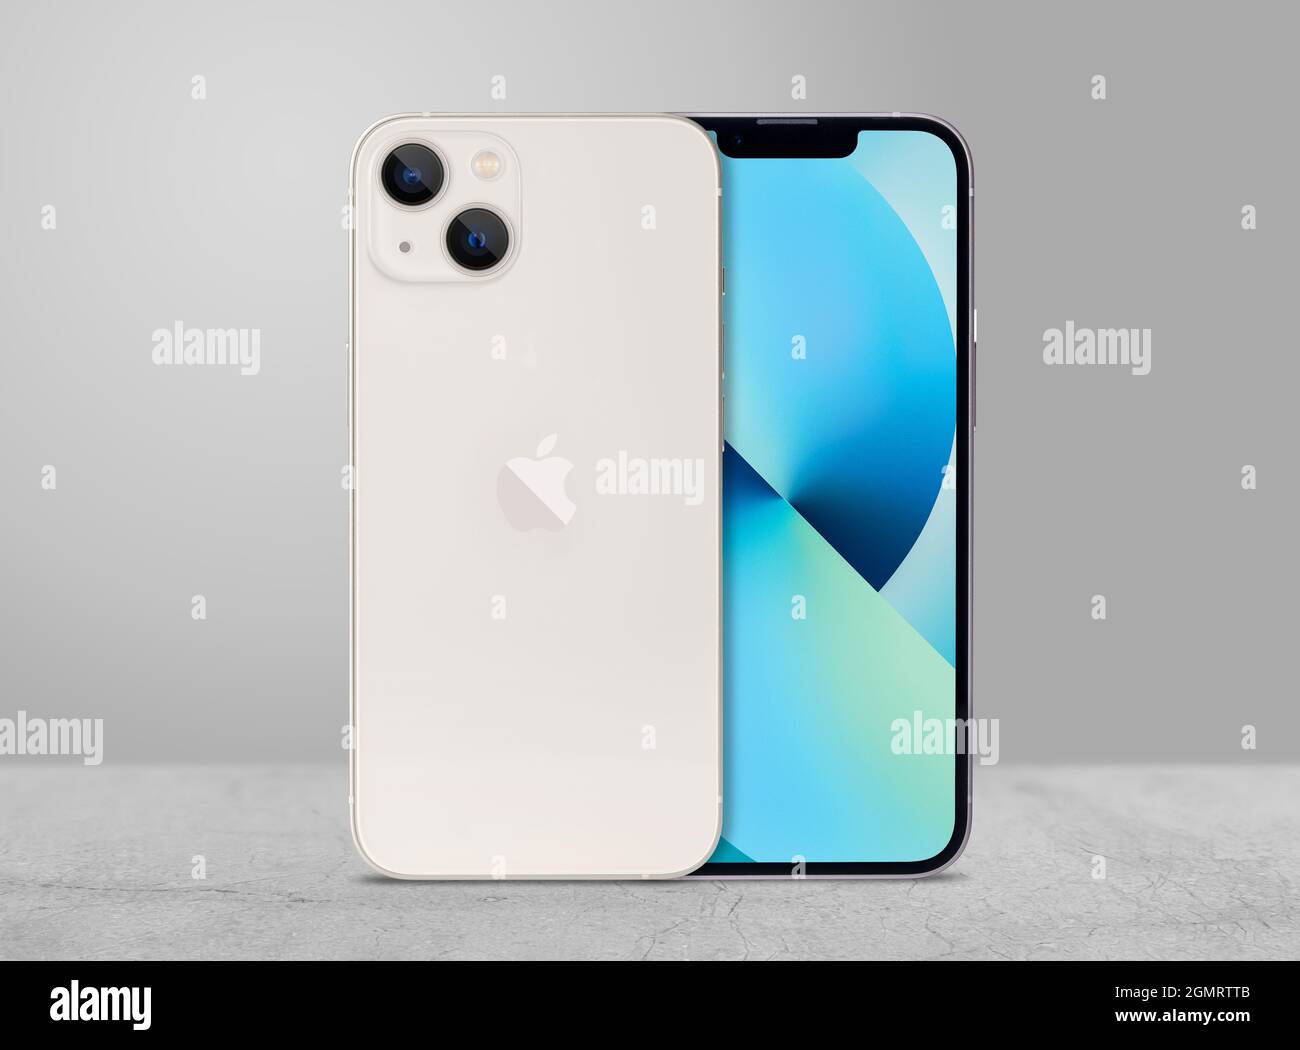 Antalya, Turkey - September 20, 2021: Newly released iphone 13 starlight color mockup set with back and front angles Stock Photo